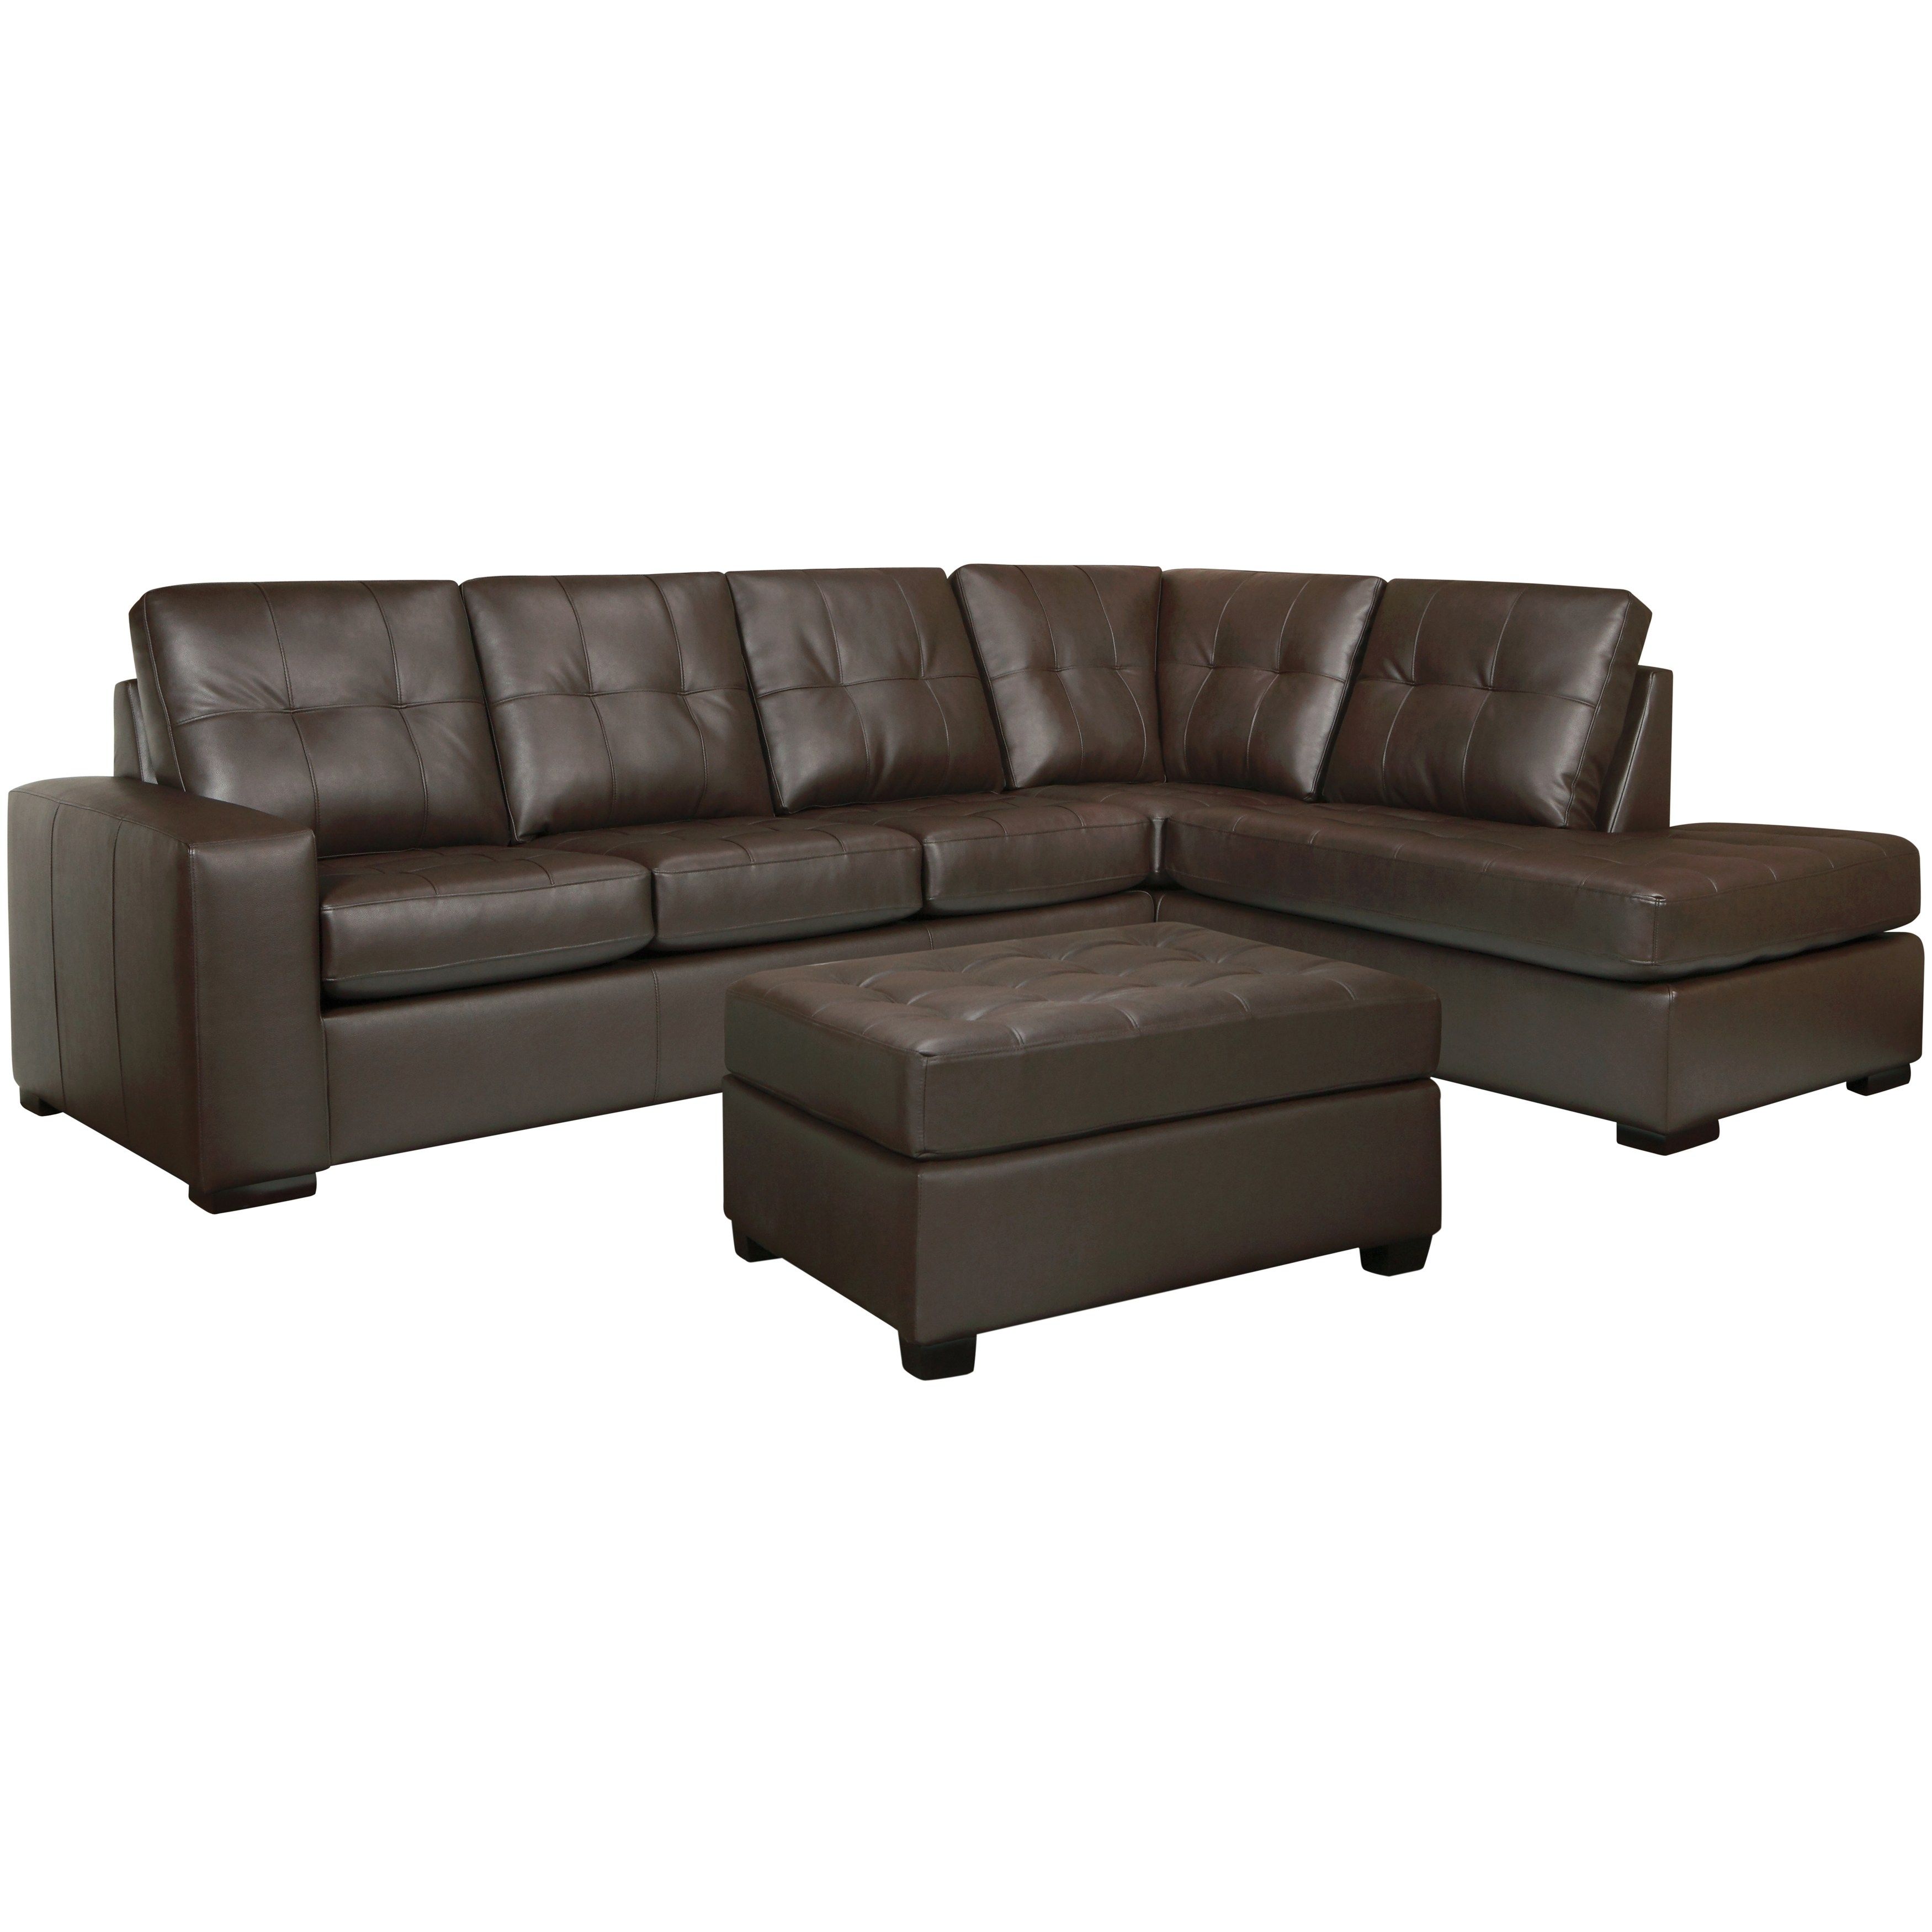 Furniture Brown Leather Sectional Couches Craigslist Missoula Intended For Craigslist Leather Sofa (Photo 14 of 15)